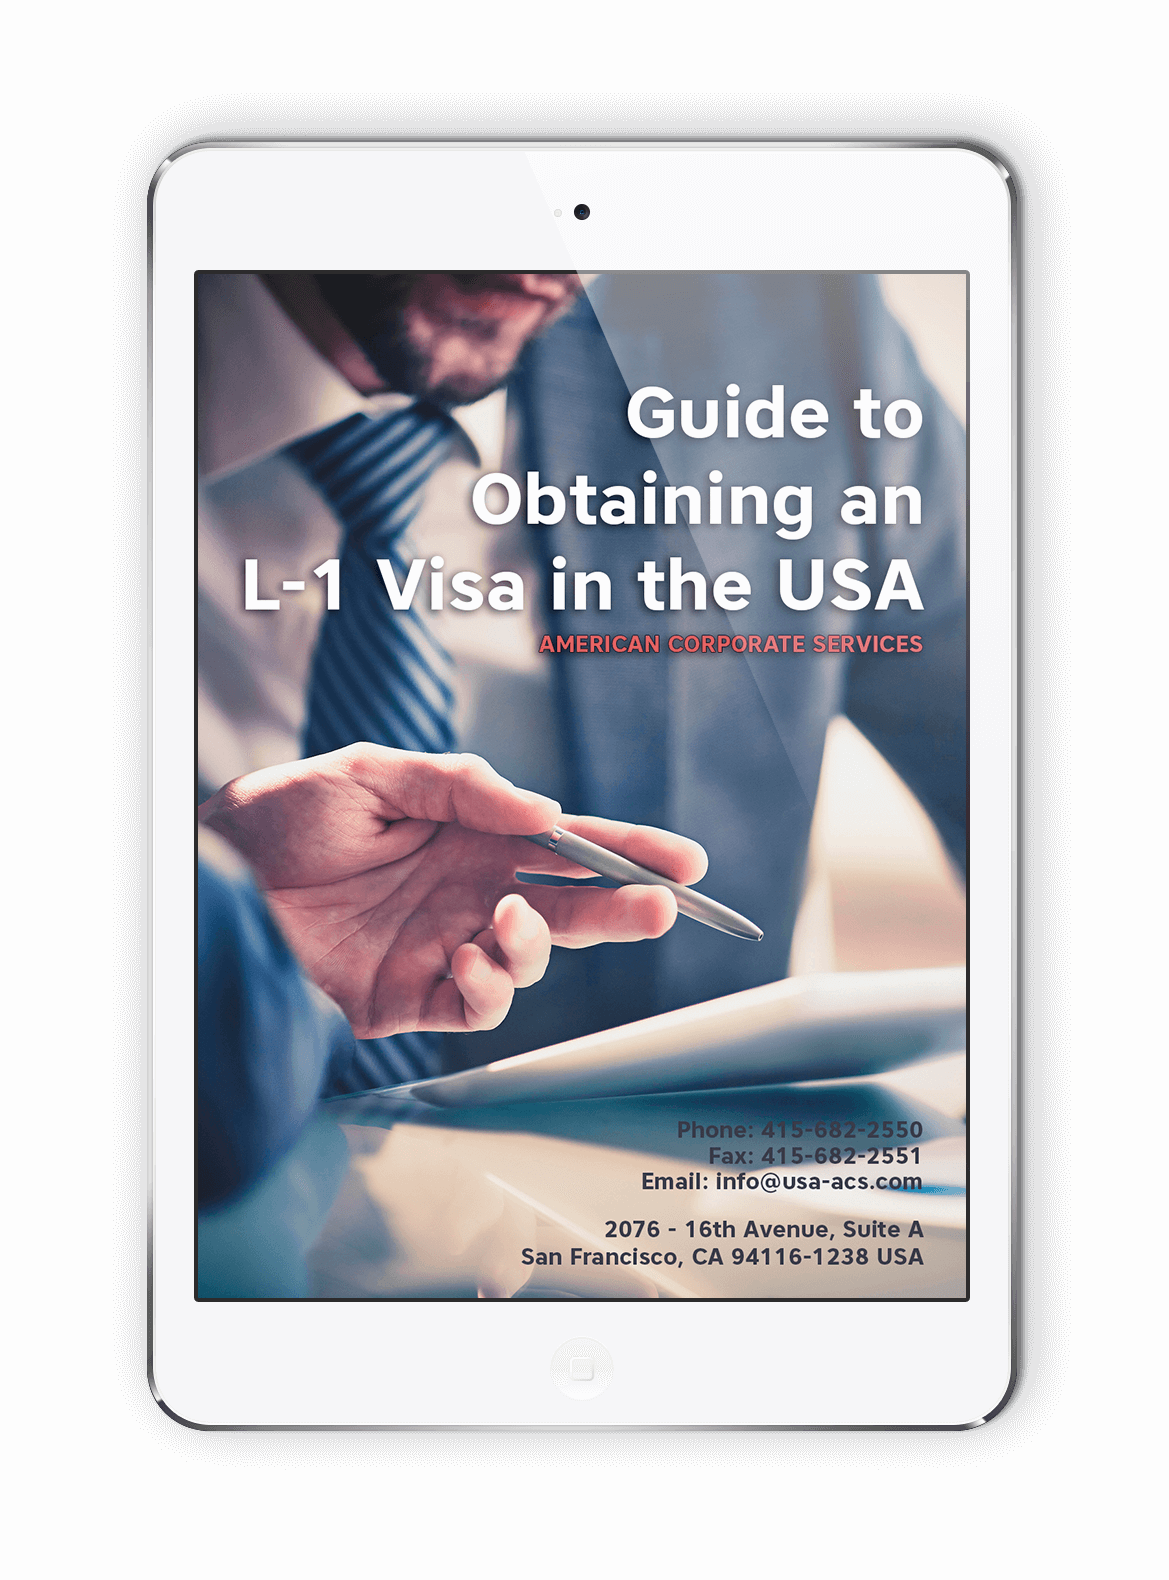 Guide to Obtaining an L-1 Visa in the USA